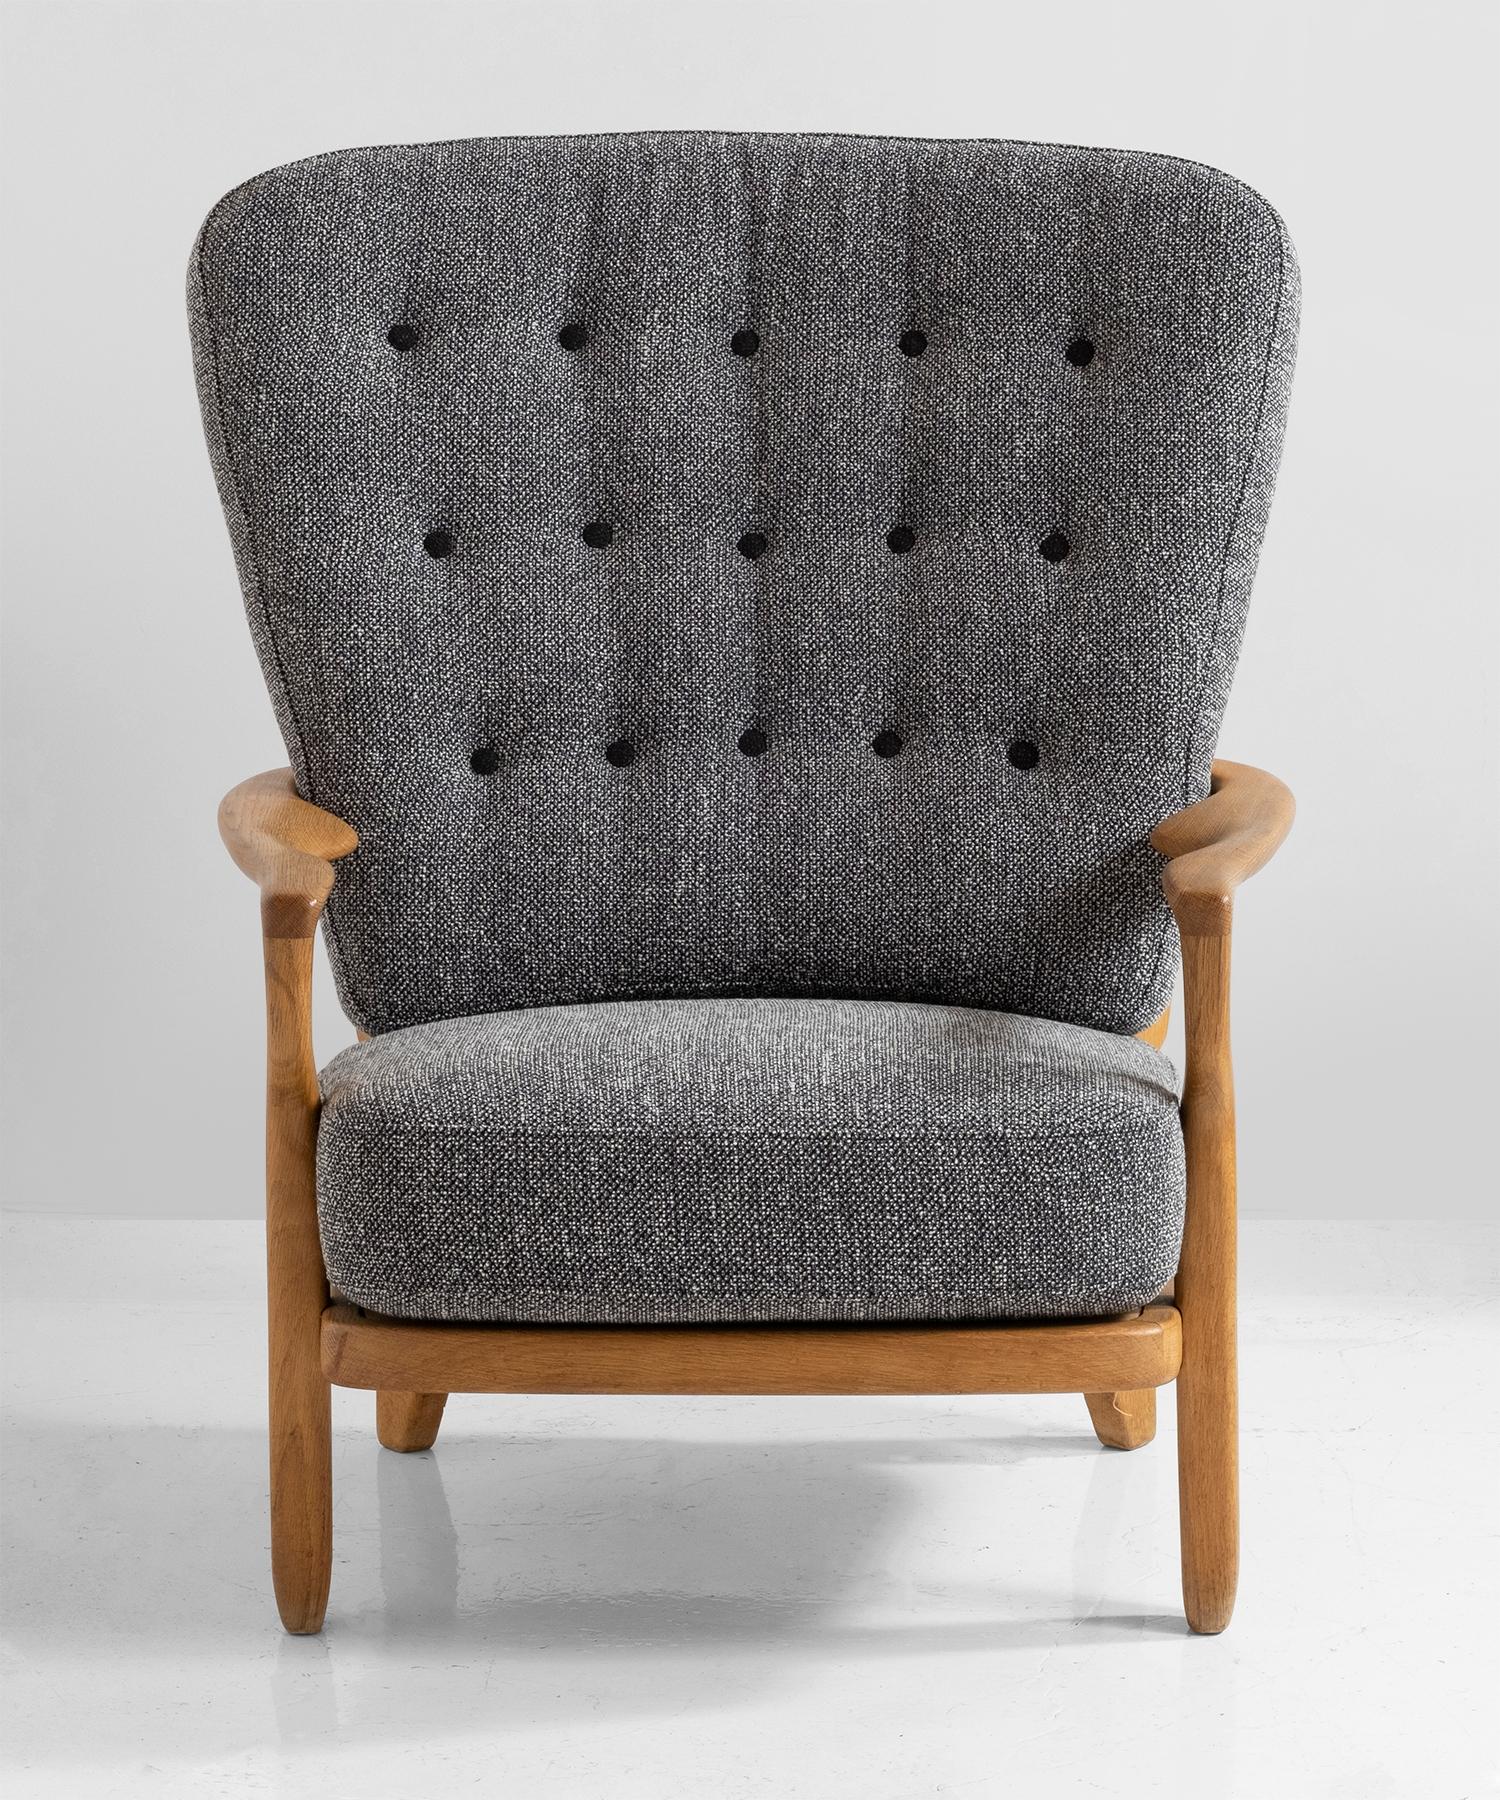 Armchairs by Guillerme et Chambron
Carved oak frame with upholstered seat and back.
